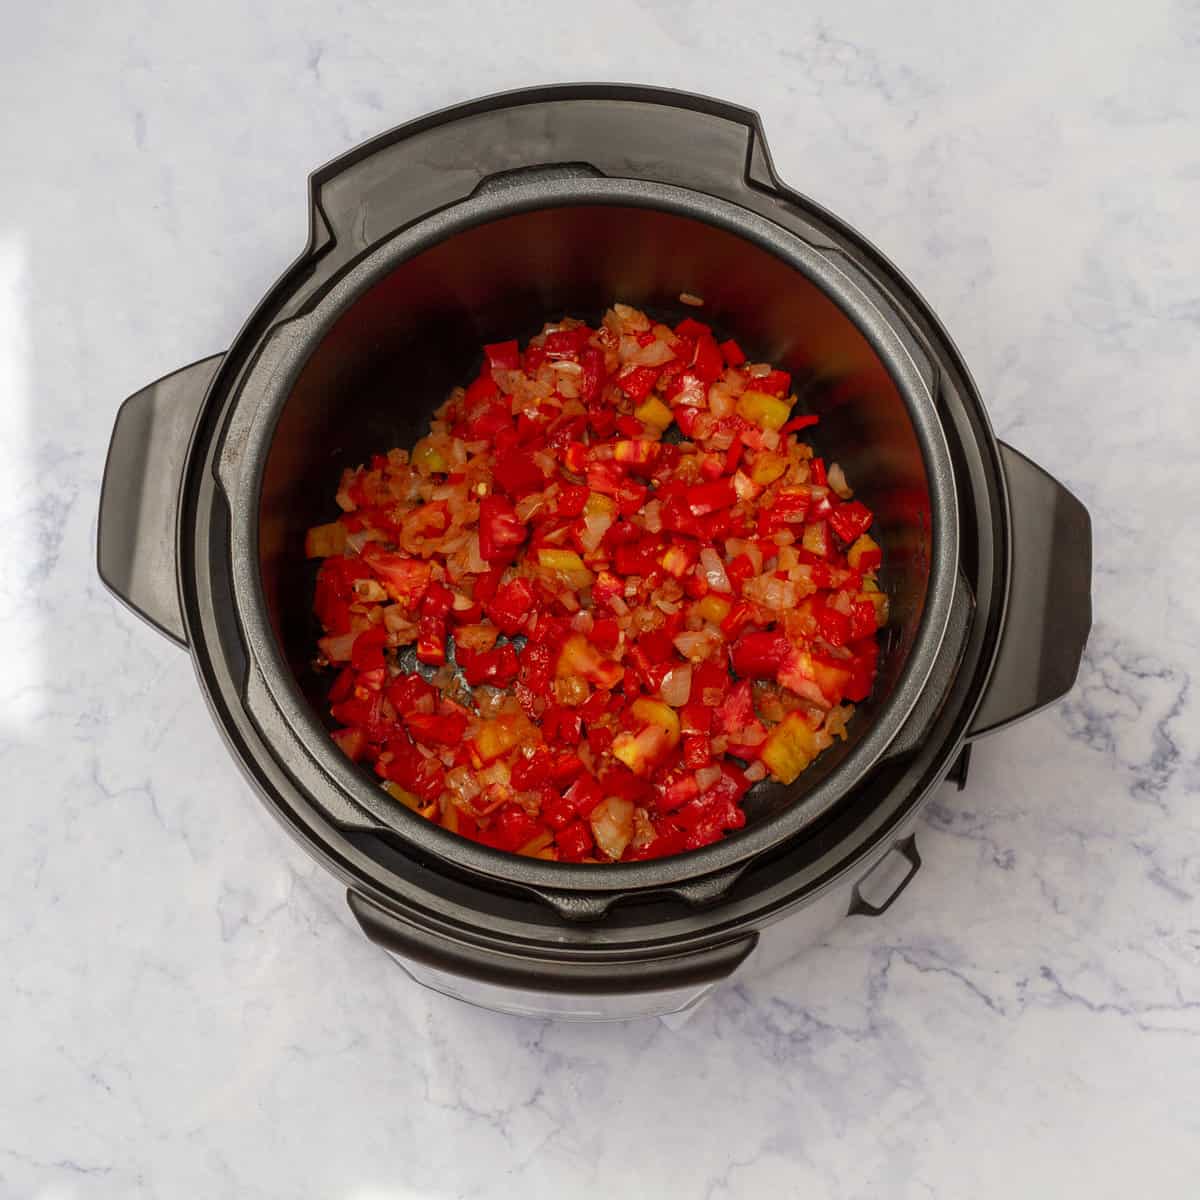 add the diced onion and sliced red bell pepper in instant pot